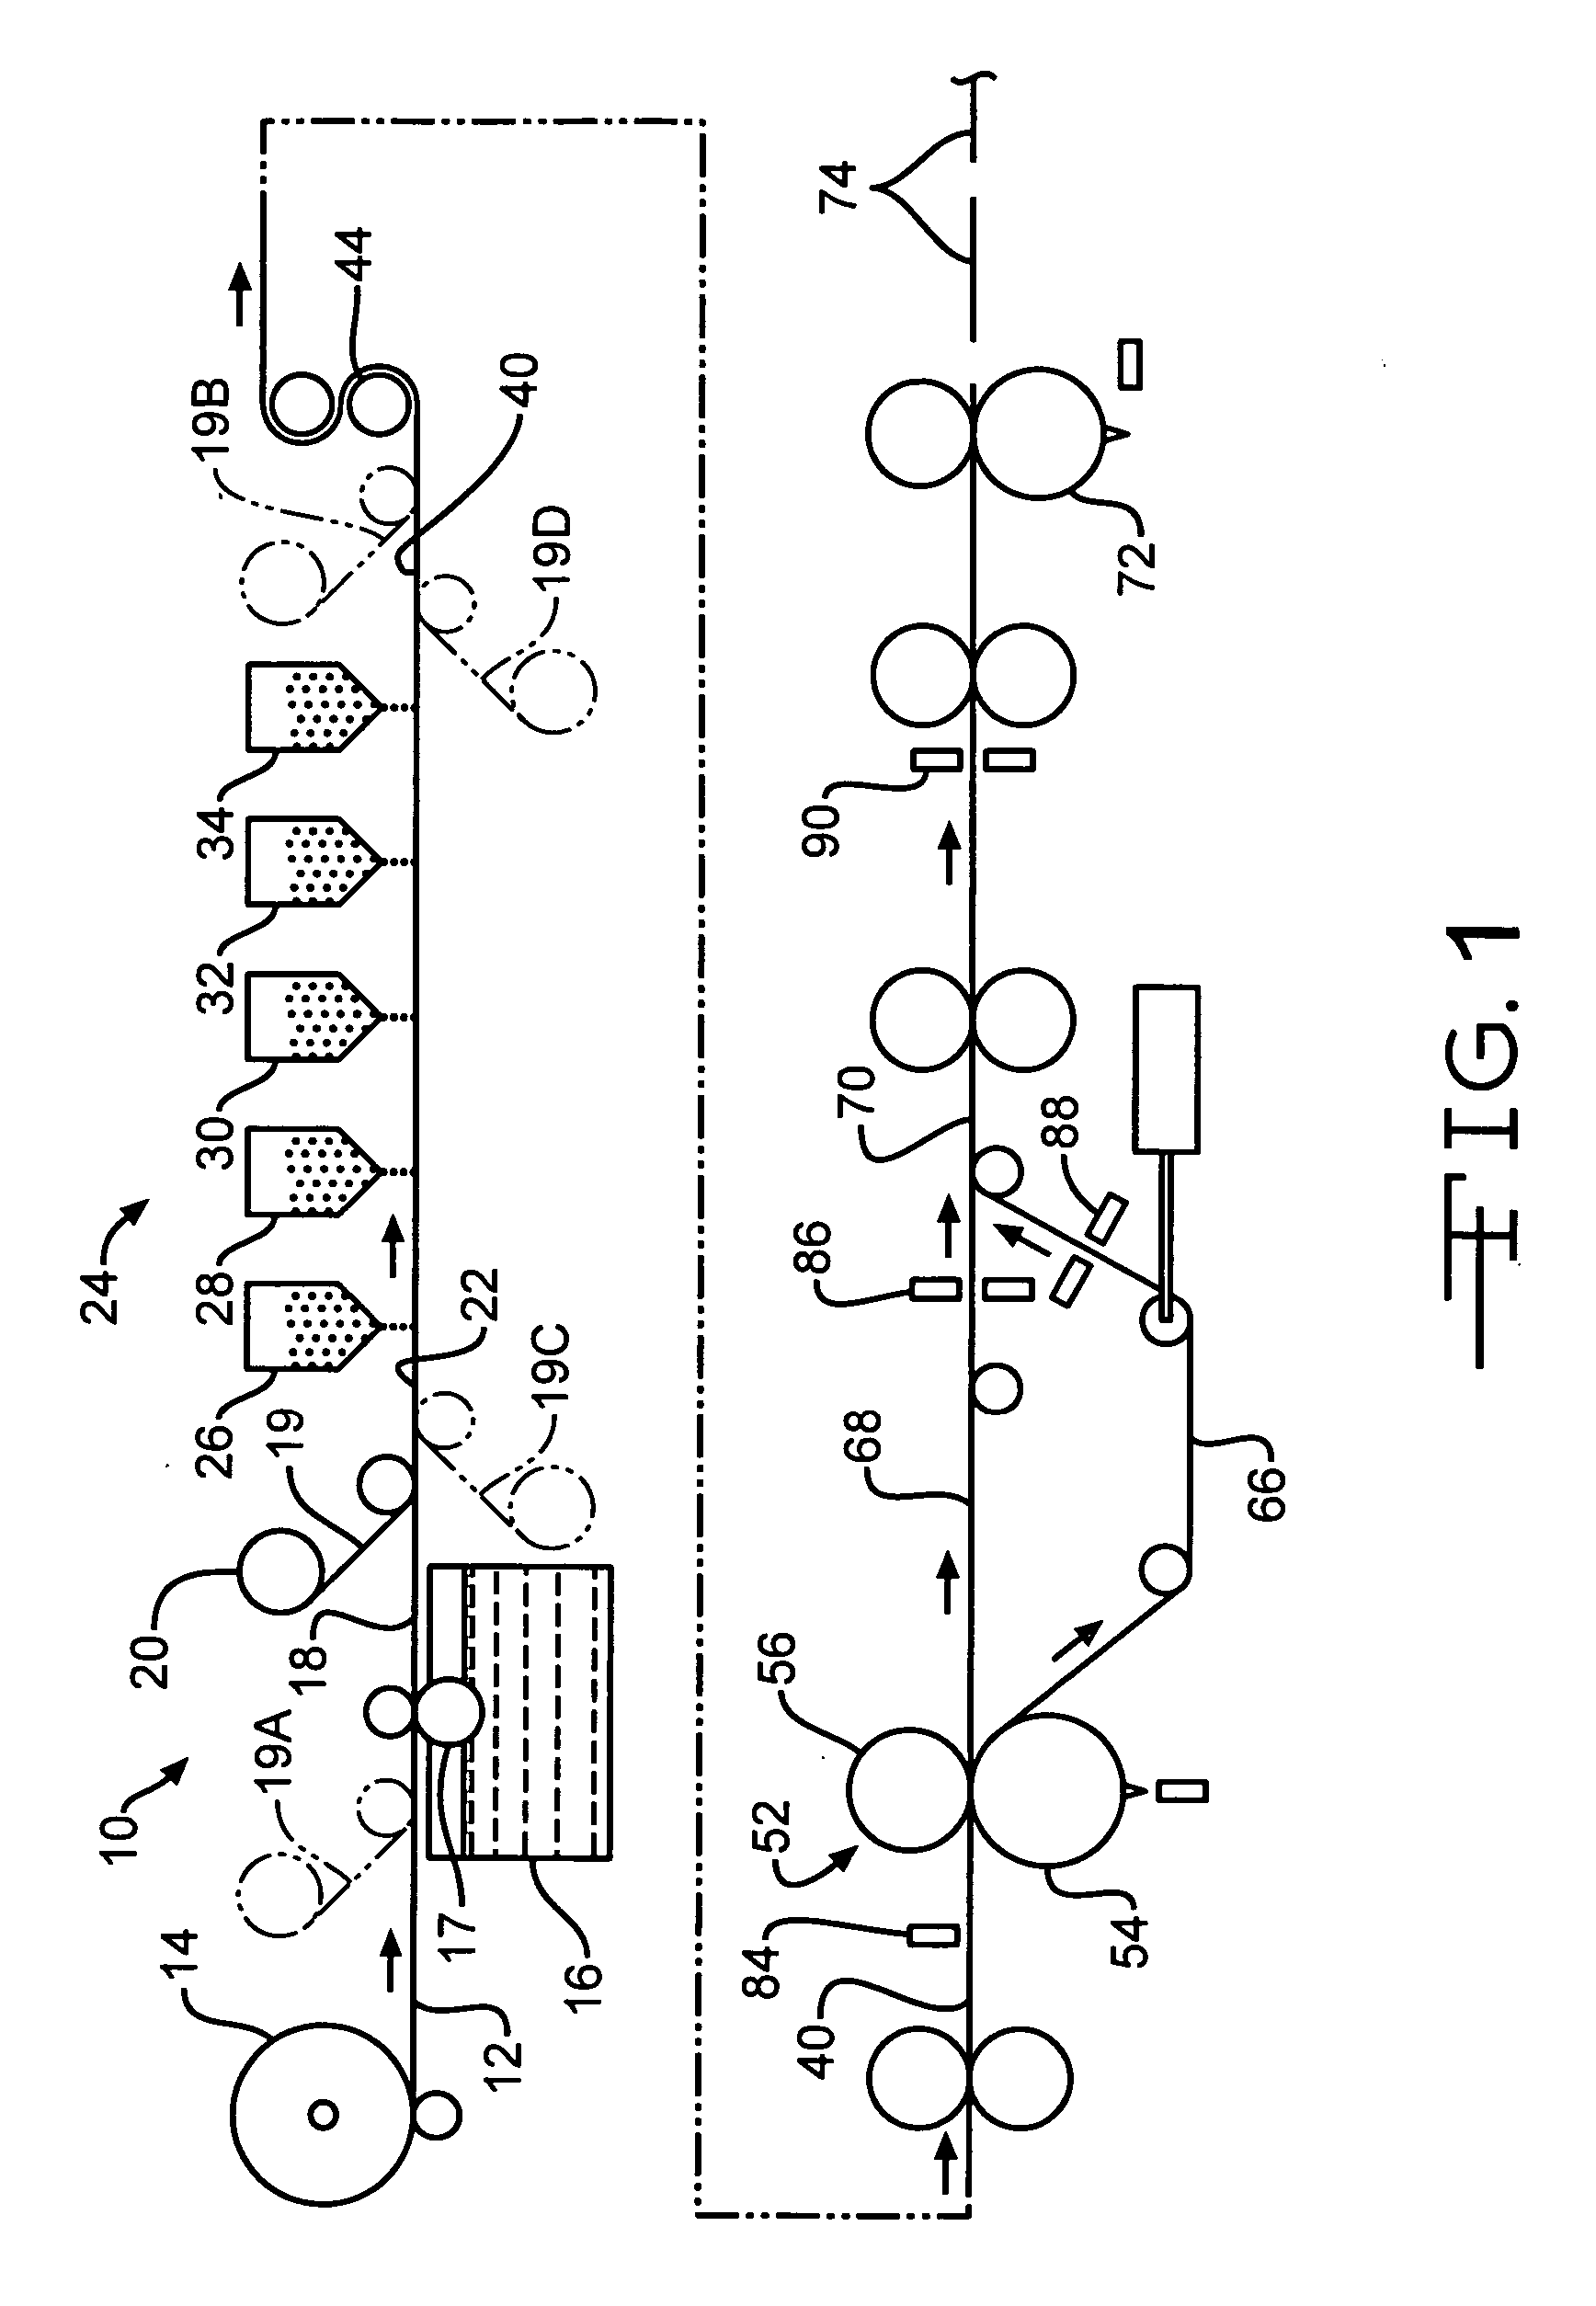 Shingle with reinforced nail zone and method of manufacturing